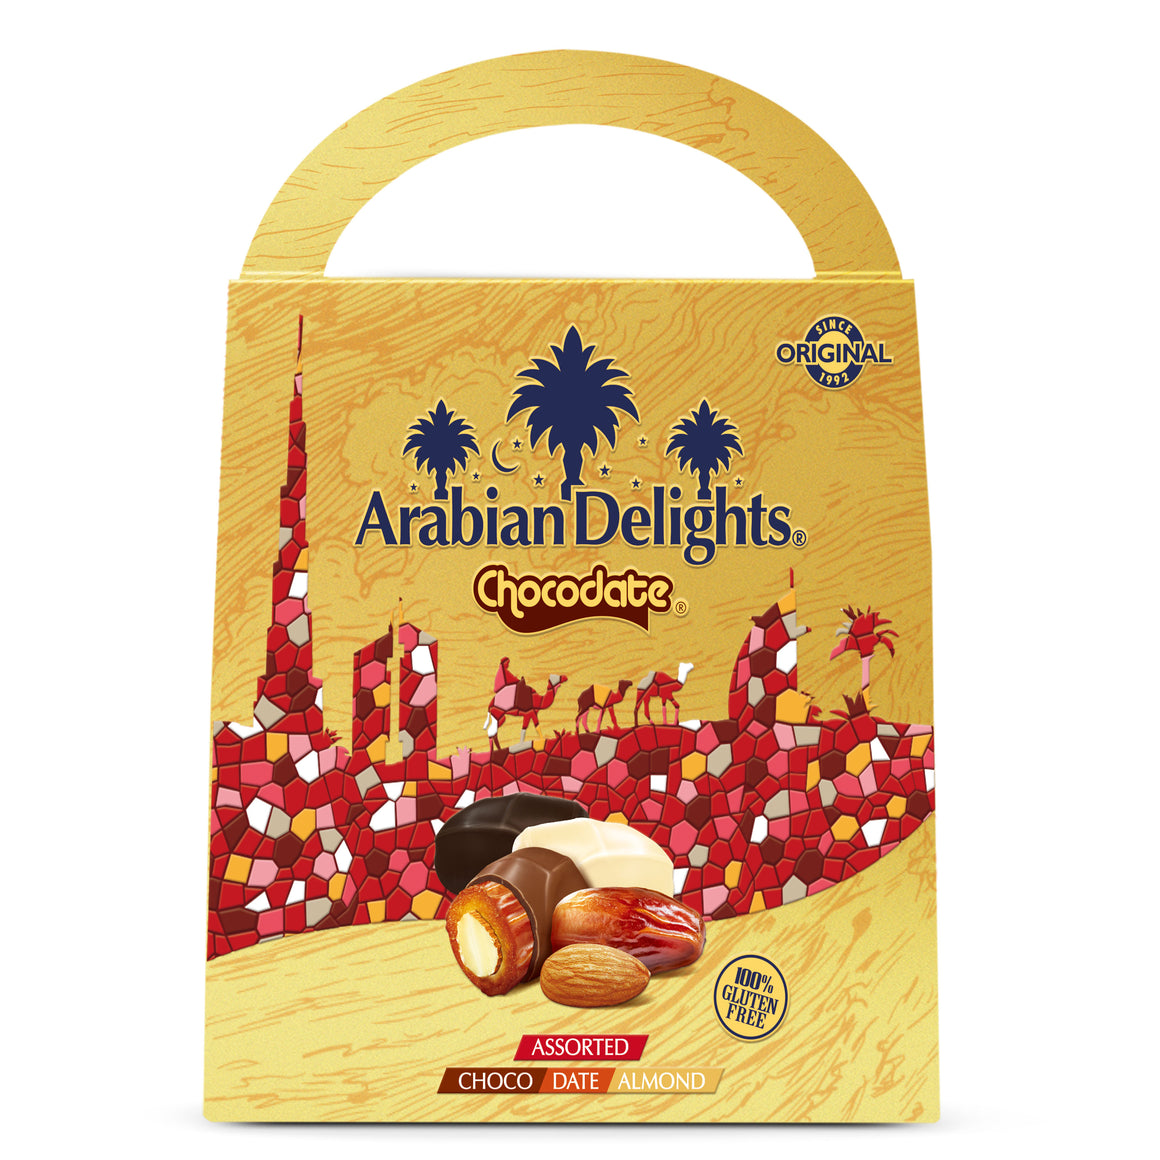 Arabian Delights Assorted Chocodate, Classic Chocolate Coated Bite-Sized Snacks, Stuffed w/ Golden Roasted Almonds ,Dates| Snacks & Sweets 725g Pouch